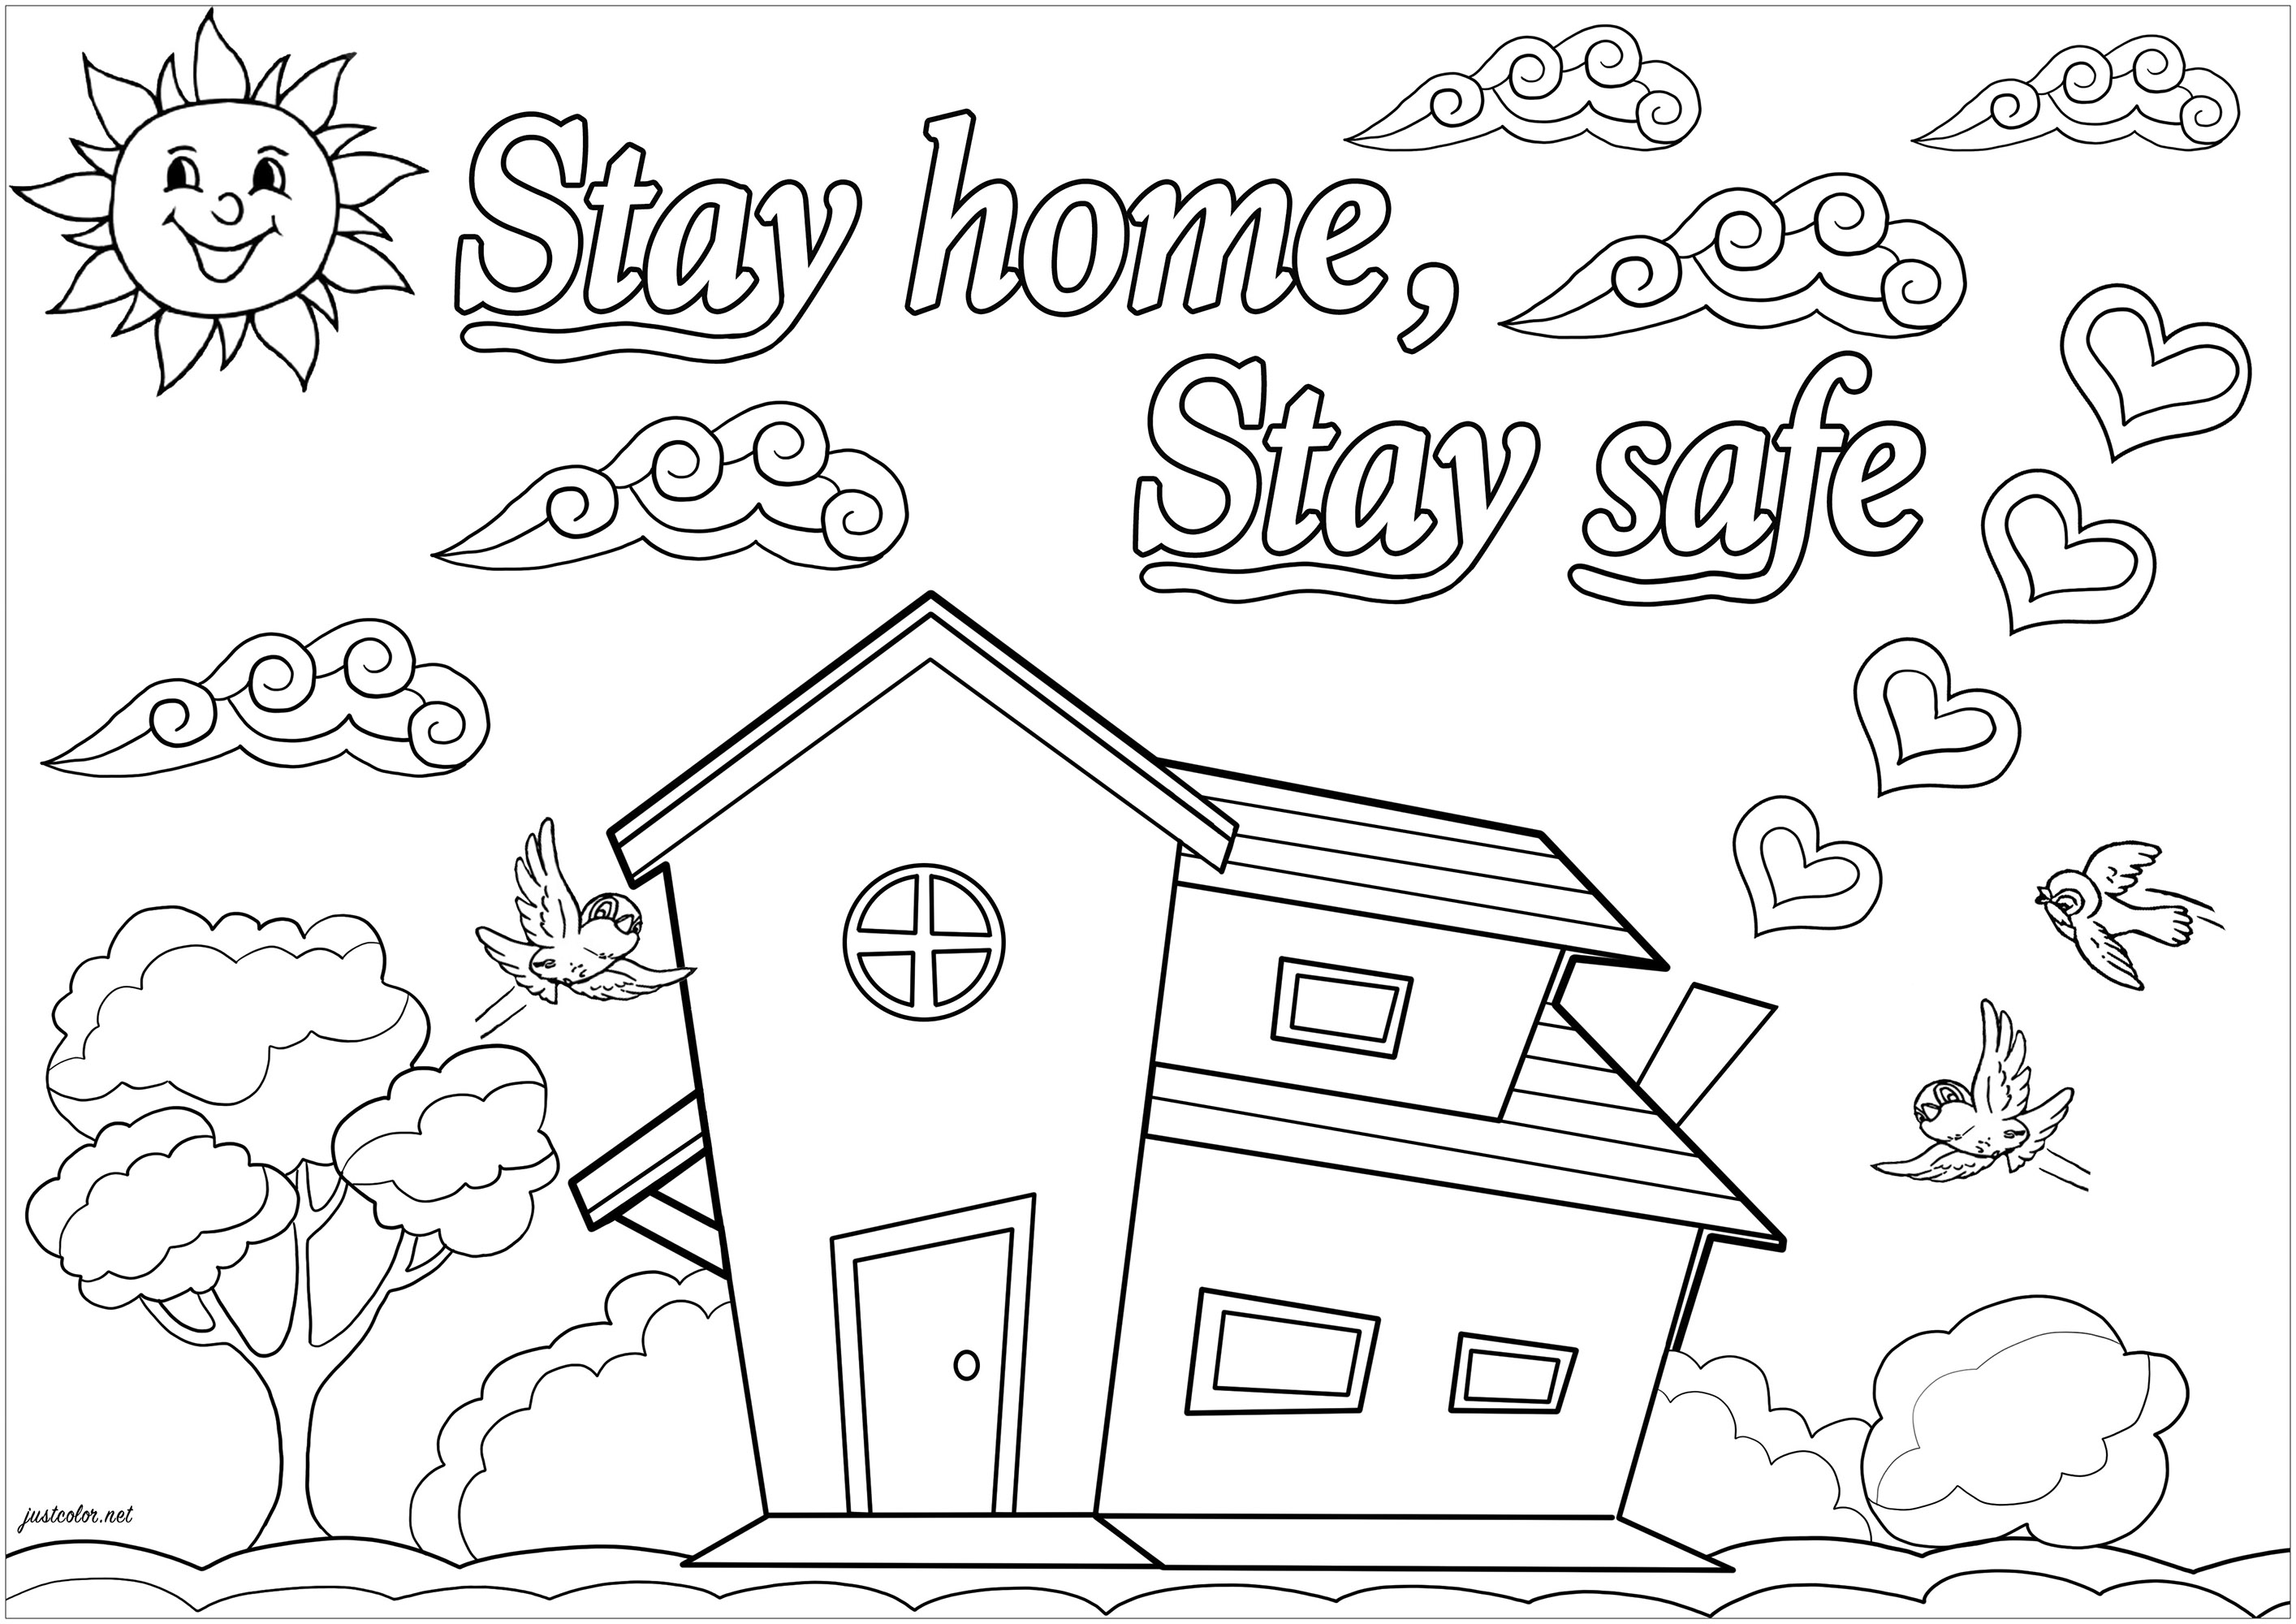 Stay home. It's the best weapon we have to fight COVID-19 ! Here is an exclusive coloring page, for adults and kids, to help keep you busy during this time, Artist : Olivier